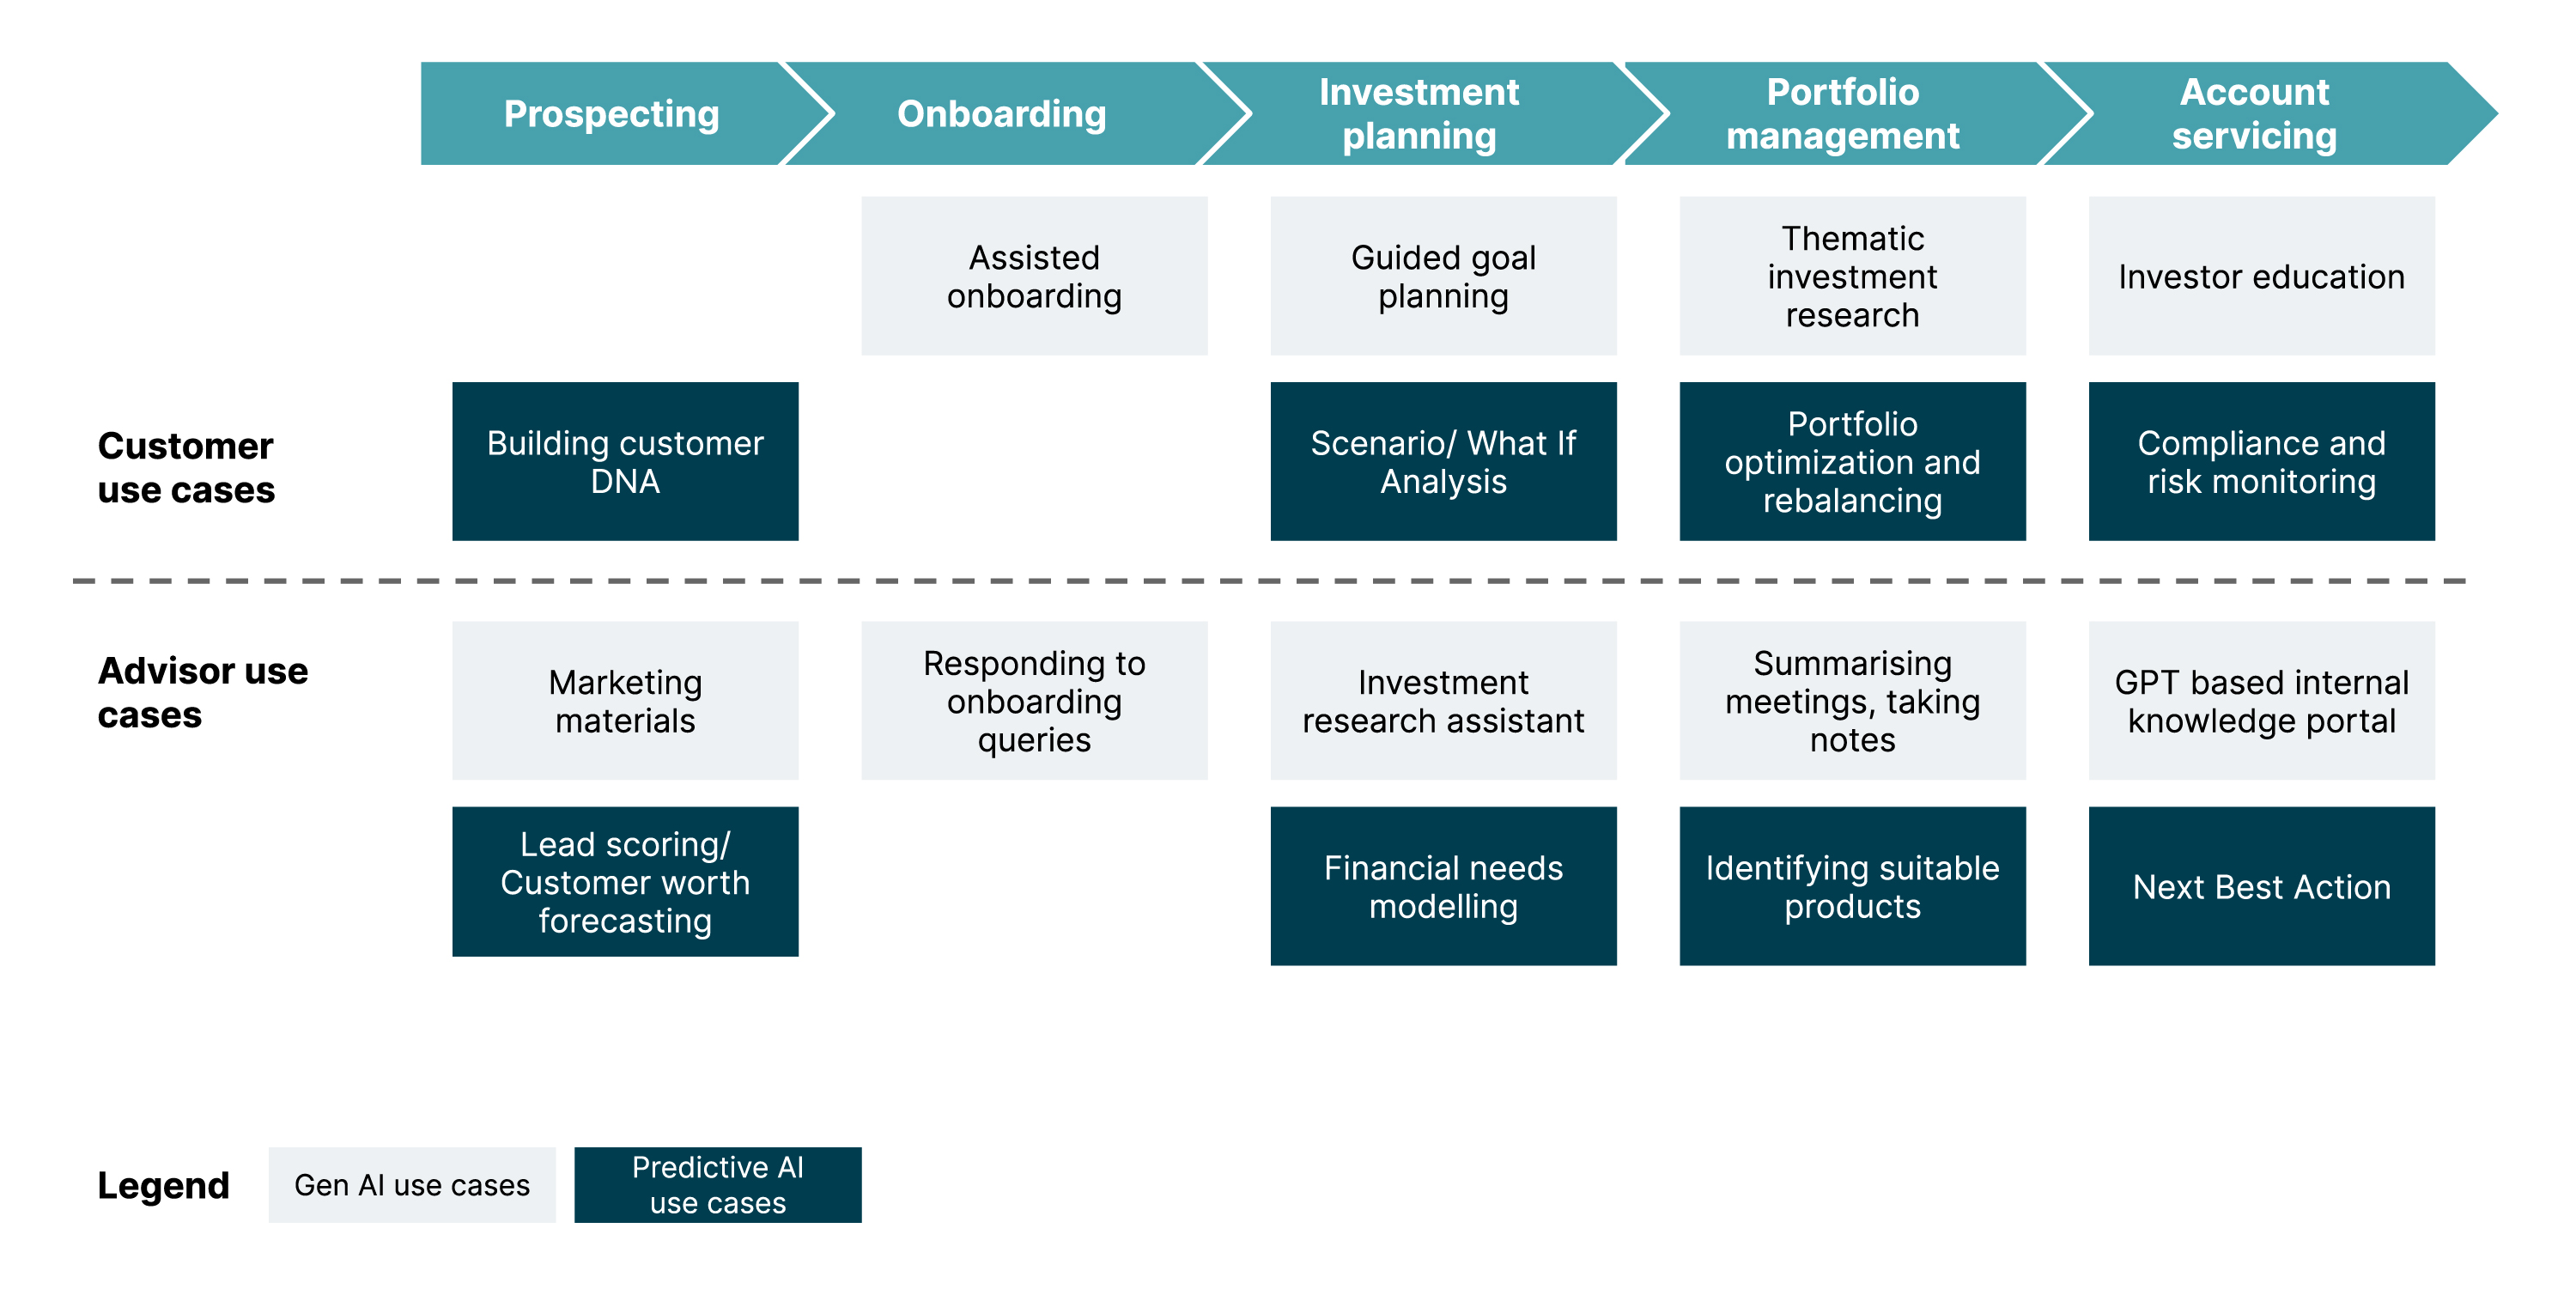 The entire wealth management value chain is shown in the diagram and we can find an indicative list of opportunities to leverage genAI along with predictive AI at every step of the process from prospective, onboarding to servicing. The diagram covers both customer and advisor use cases. 